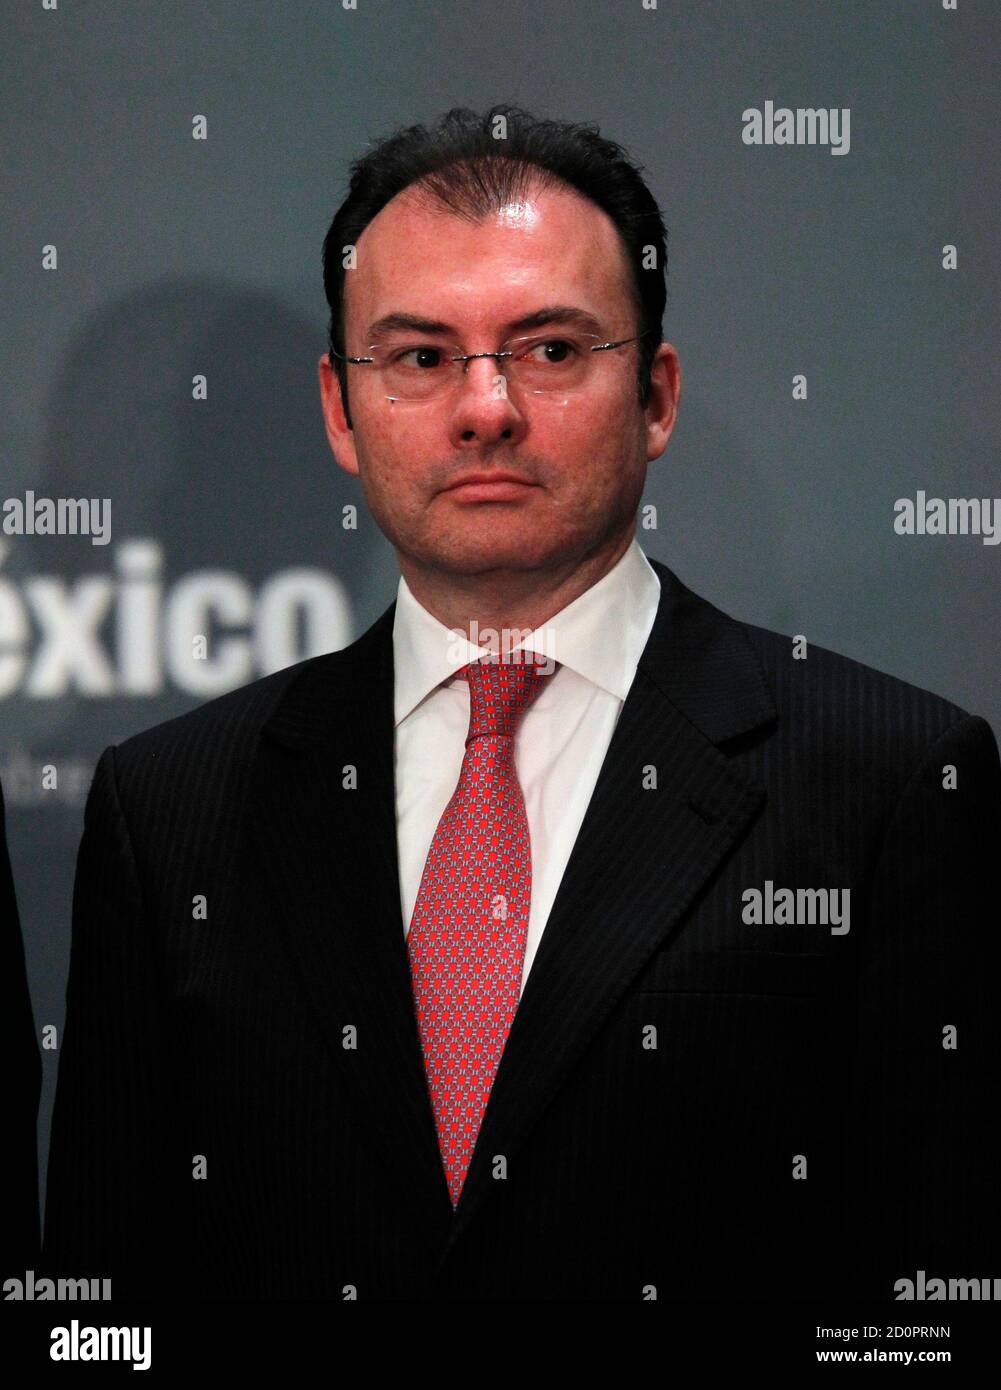 Luis Videgaray, Mexico's newly appointed finance minister, attends the presentation of incoming President Enrique Pena Nieto's cabinet in Mexico City November 30, 2012. Pena Nieto on Friday named close allies to head the important finance and interior ministries as he seeks to spur growth and reduce drug-related violence in Latin America's second-biggest economy. Pena Nieto will be sworn in as president on December 1. REUTERS/Edgard Garrido (MEXICO - Tags: POLITICS BUSINESS) Stock Photo